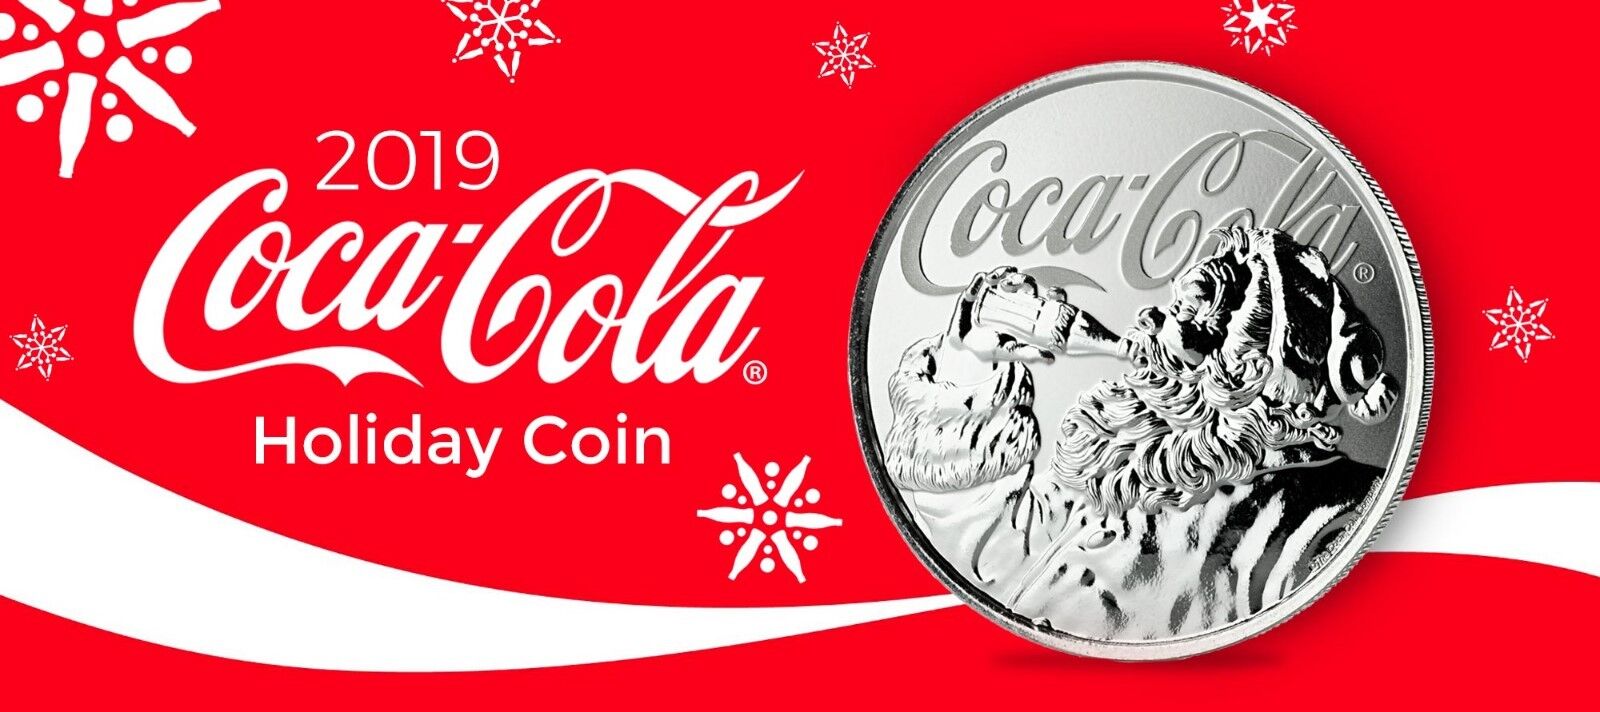 2019 1oz .999 Silver Coca-Cola® Holiday Coin - Limited Mintage Collectible #A465 Без бренда - фотография #12